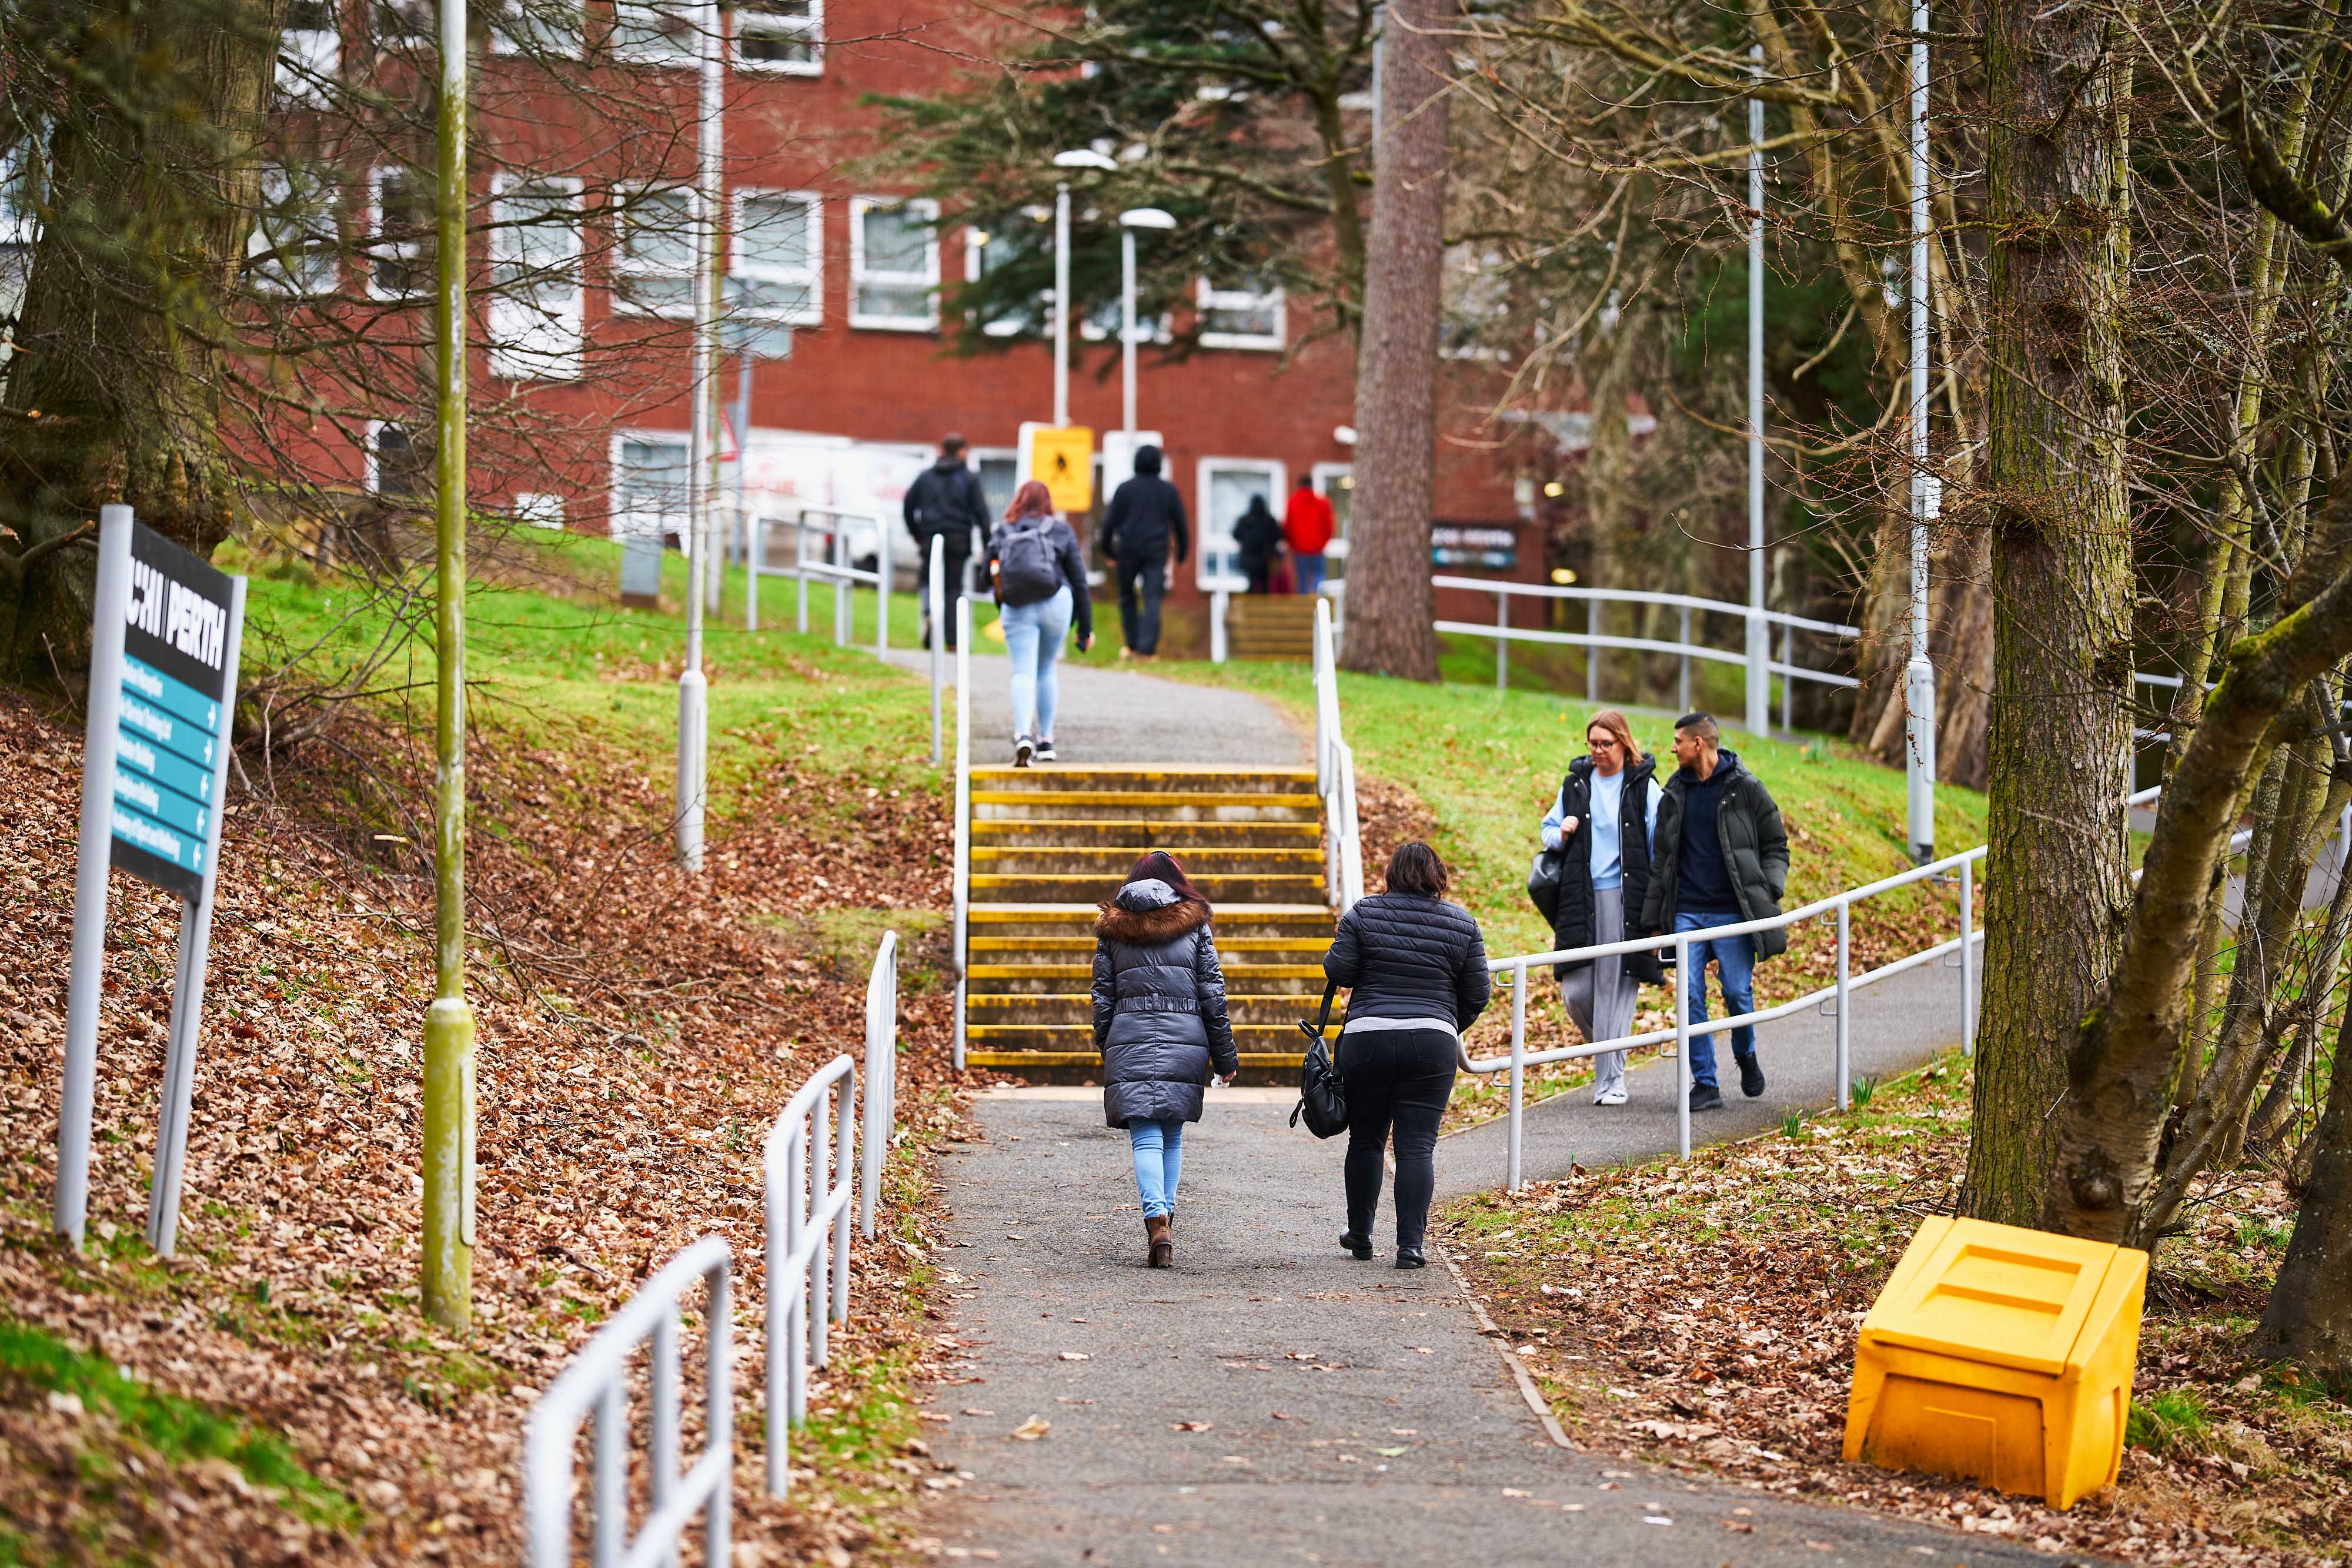 Scene of leafy campus and students walking up path